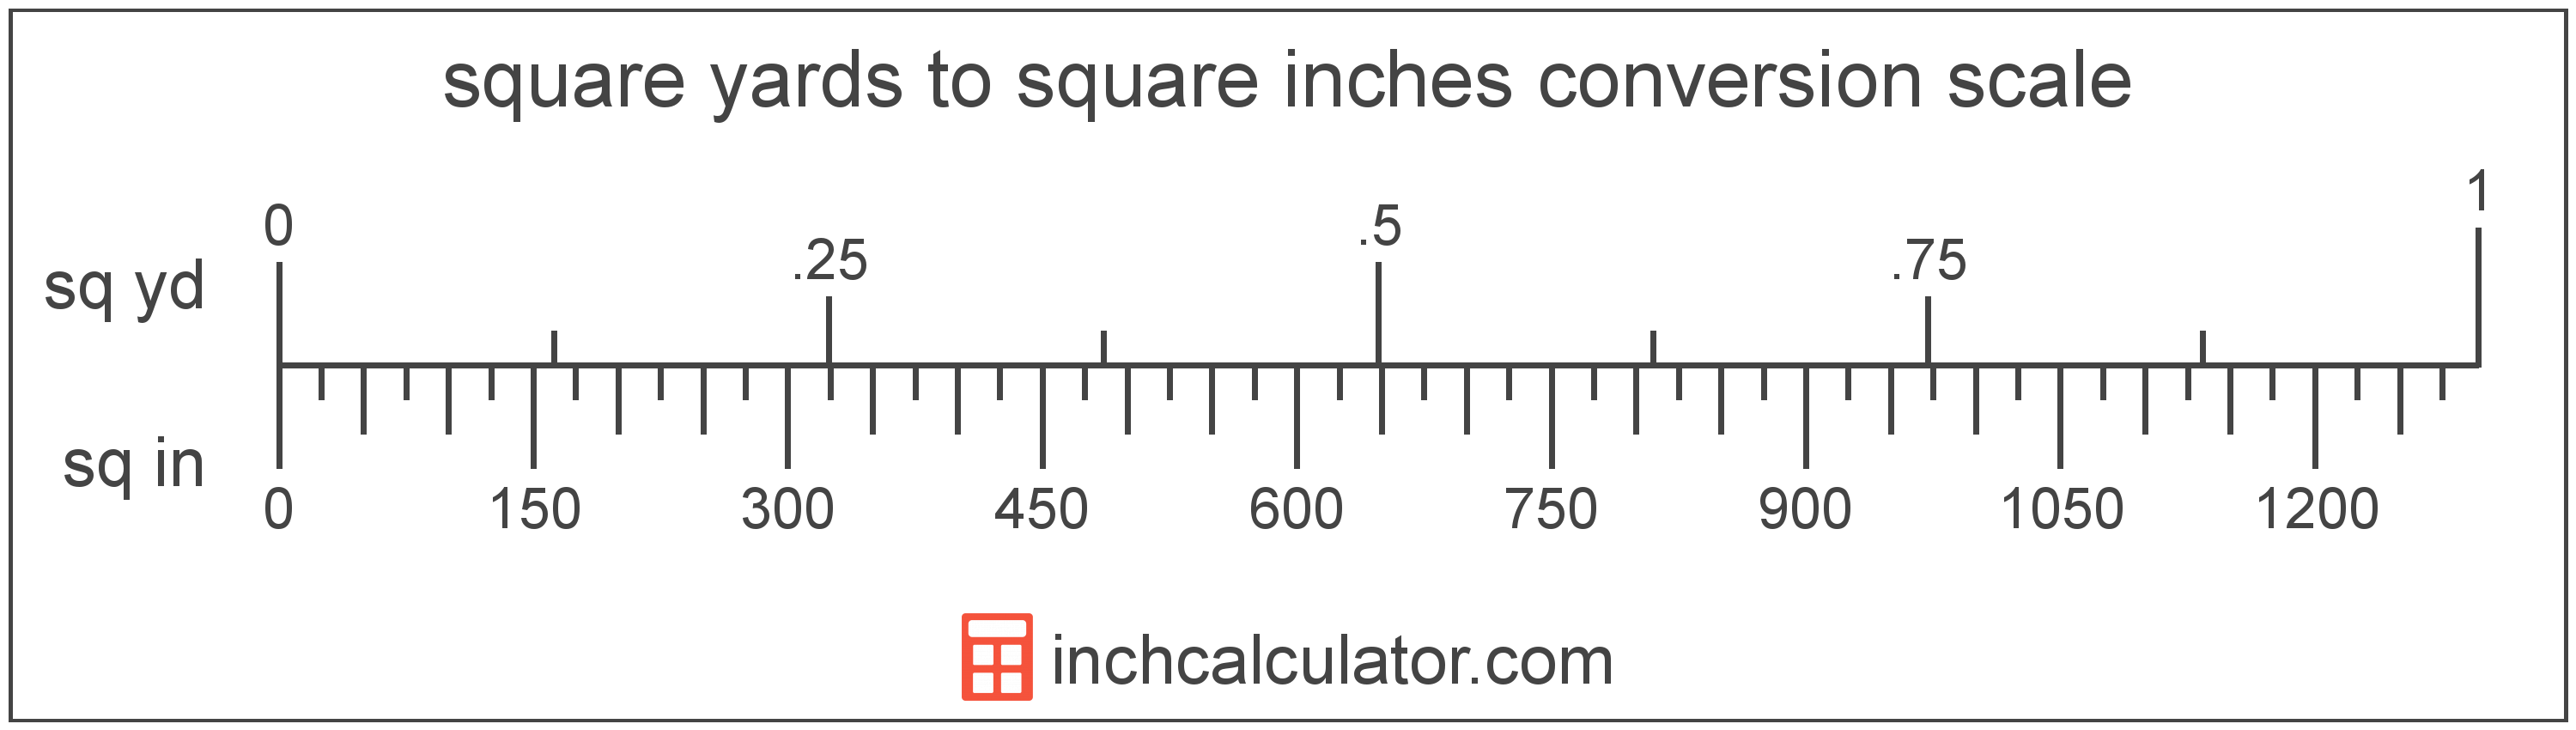 square-yards-to-square-inches-conversion-sq-yd-to-sq-in